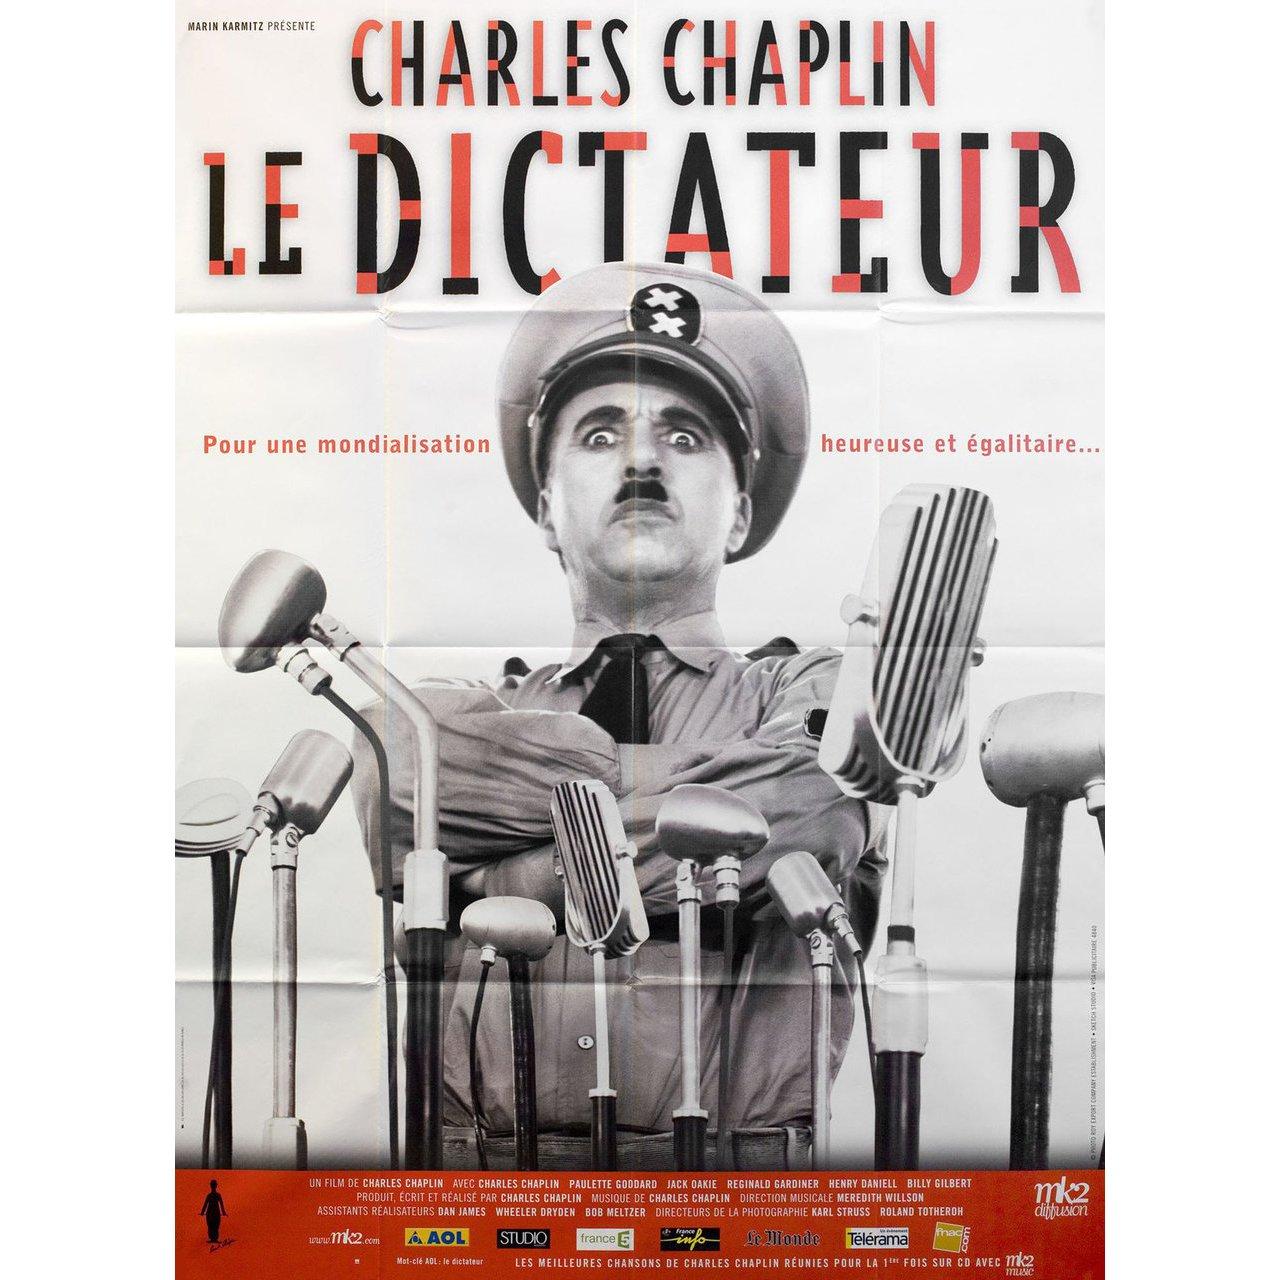 Contemporary 'The Great Dictator' R2002 French Grande Film Poster For Sale